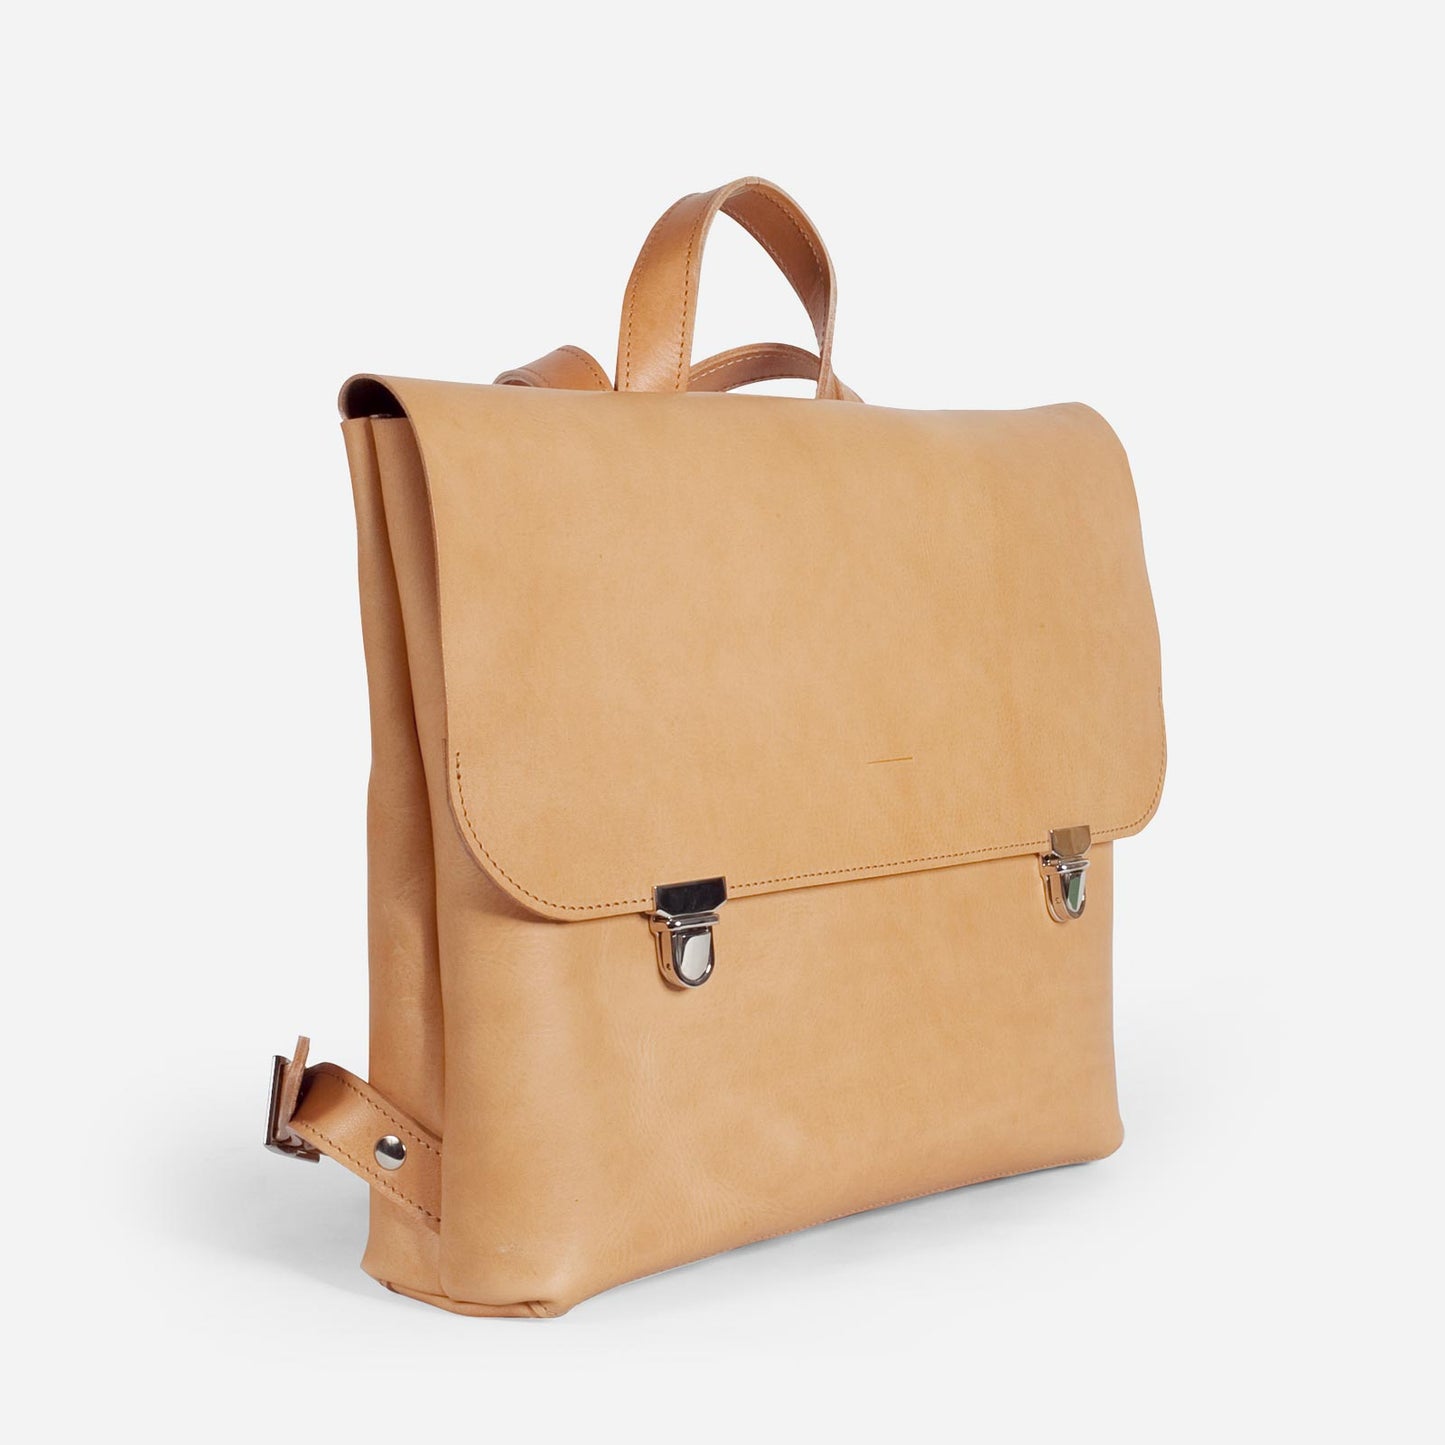 Asterio backpack